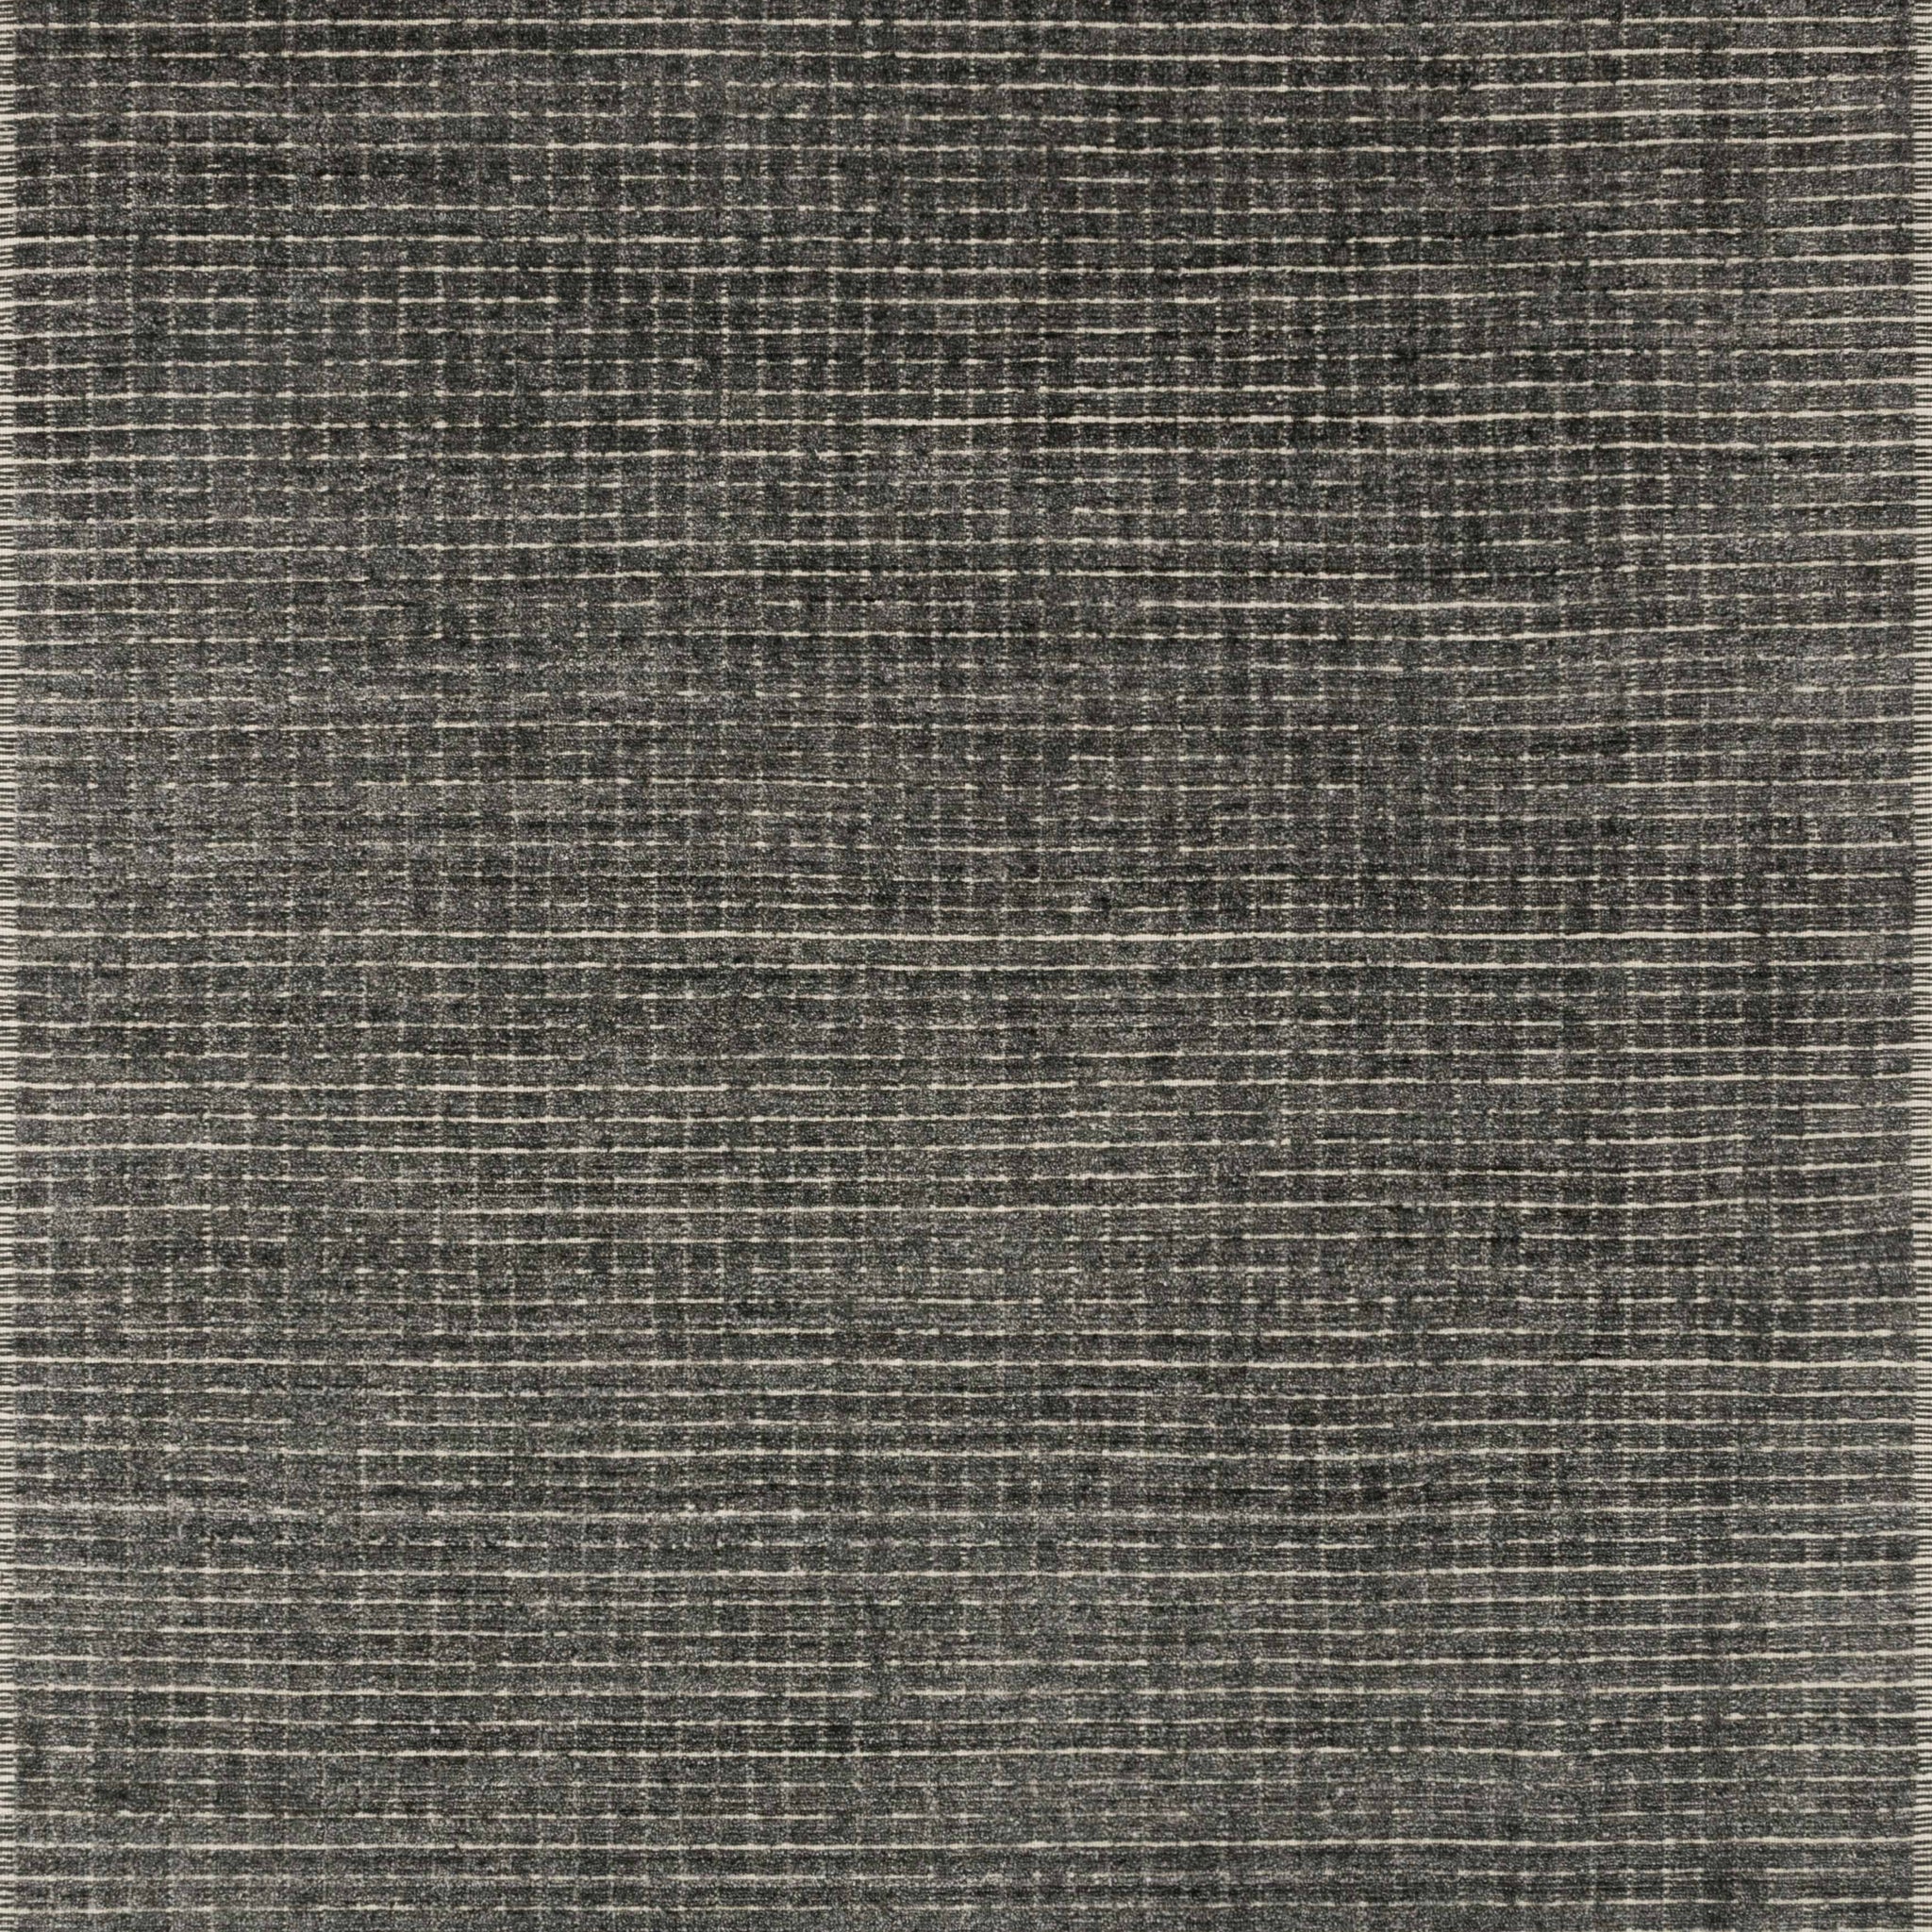 Loloi Beverly Charcoal 9'-6" x 13'-6" Area Rug